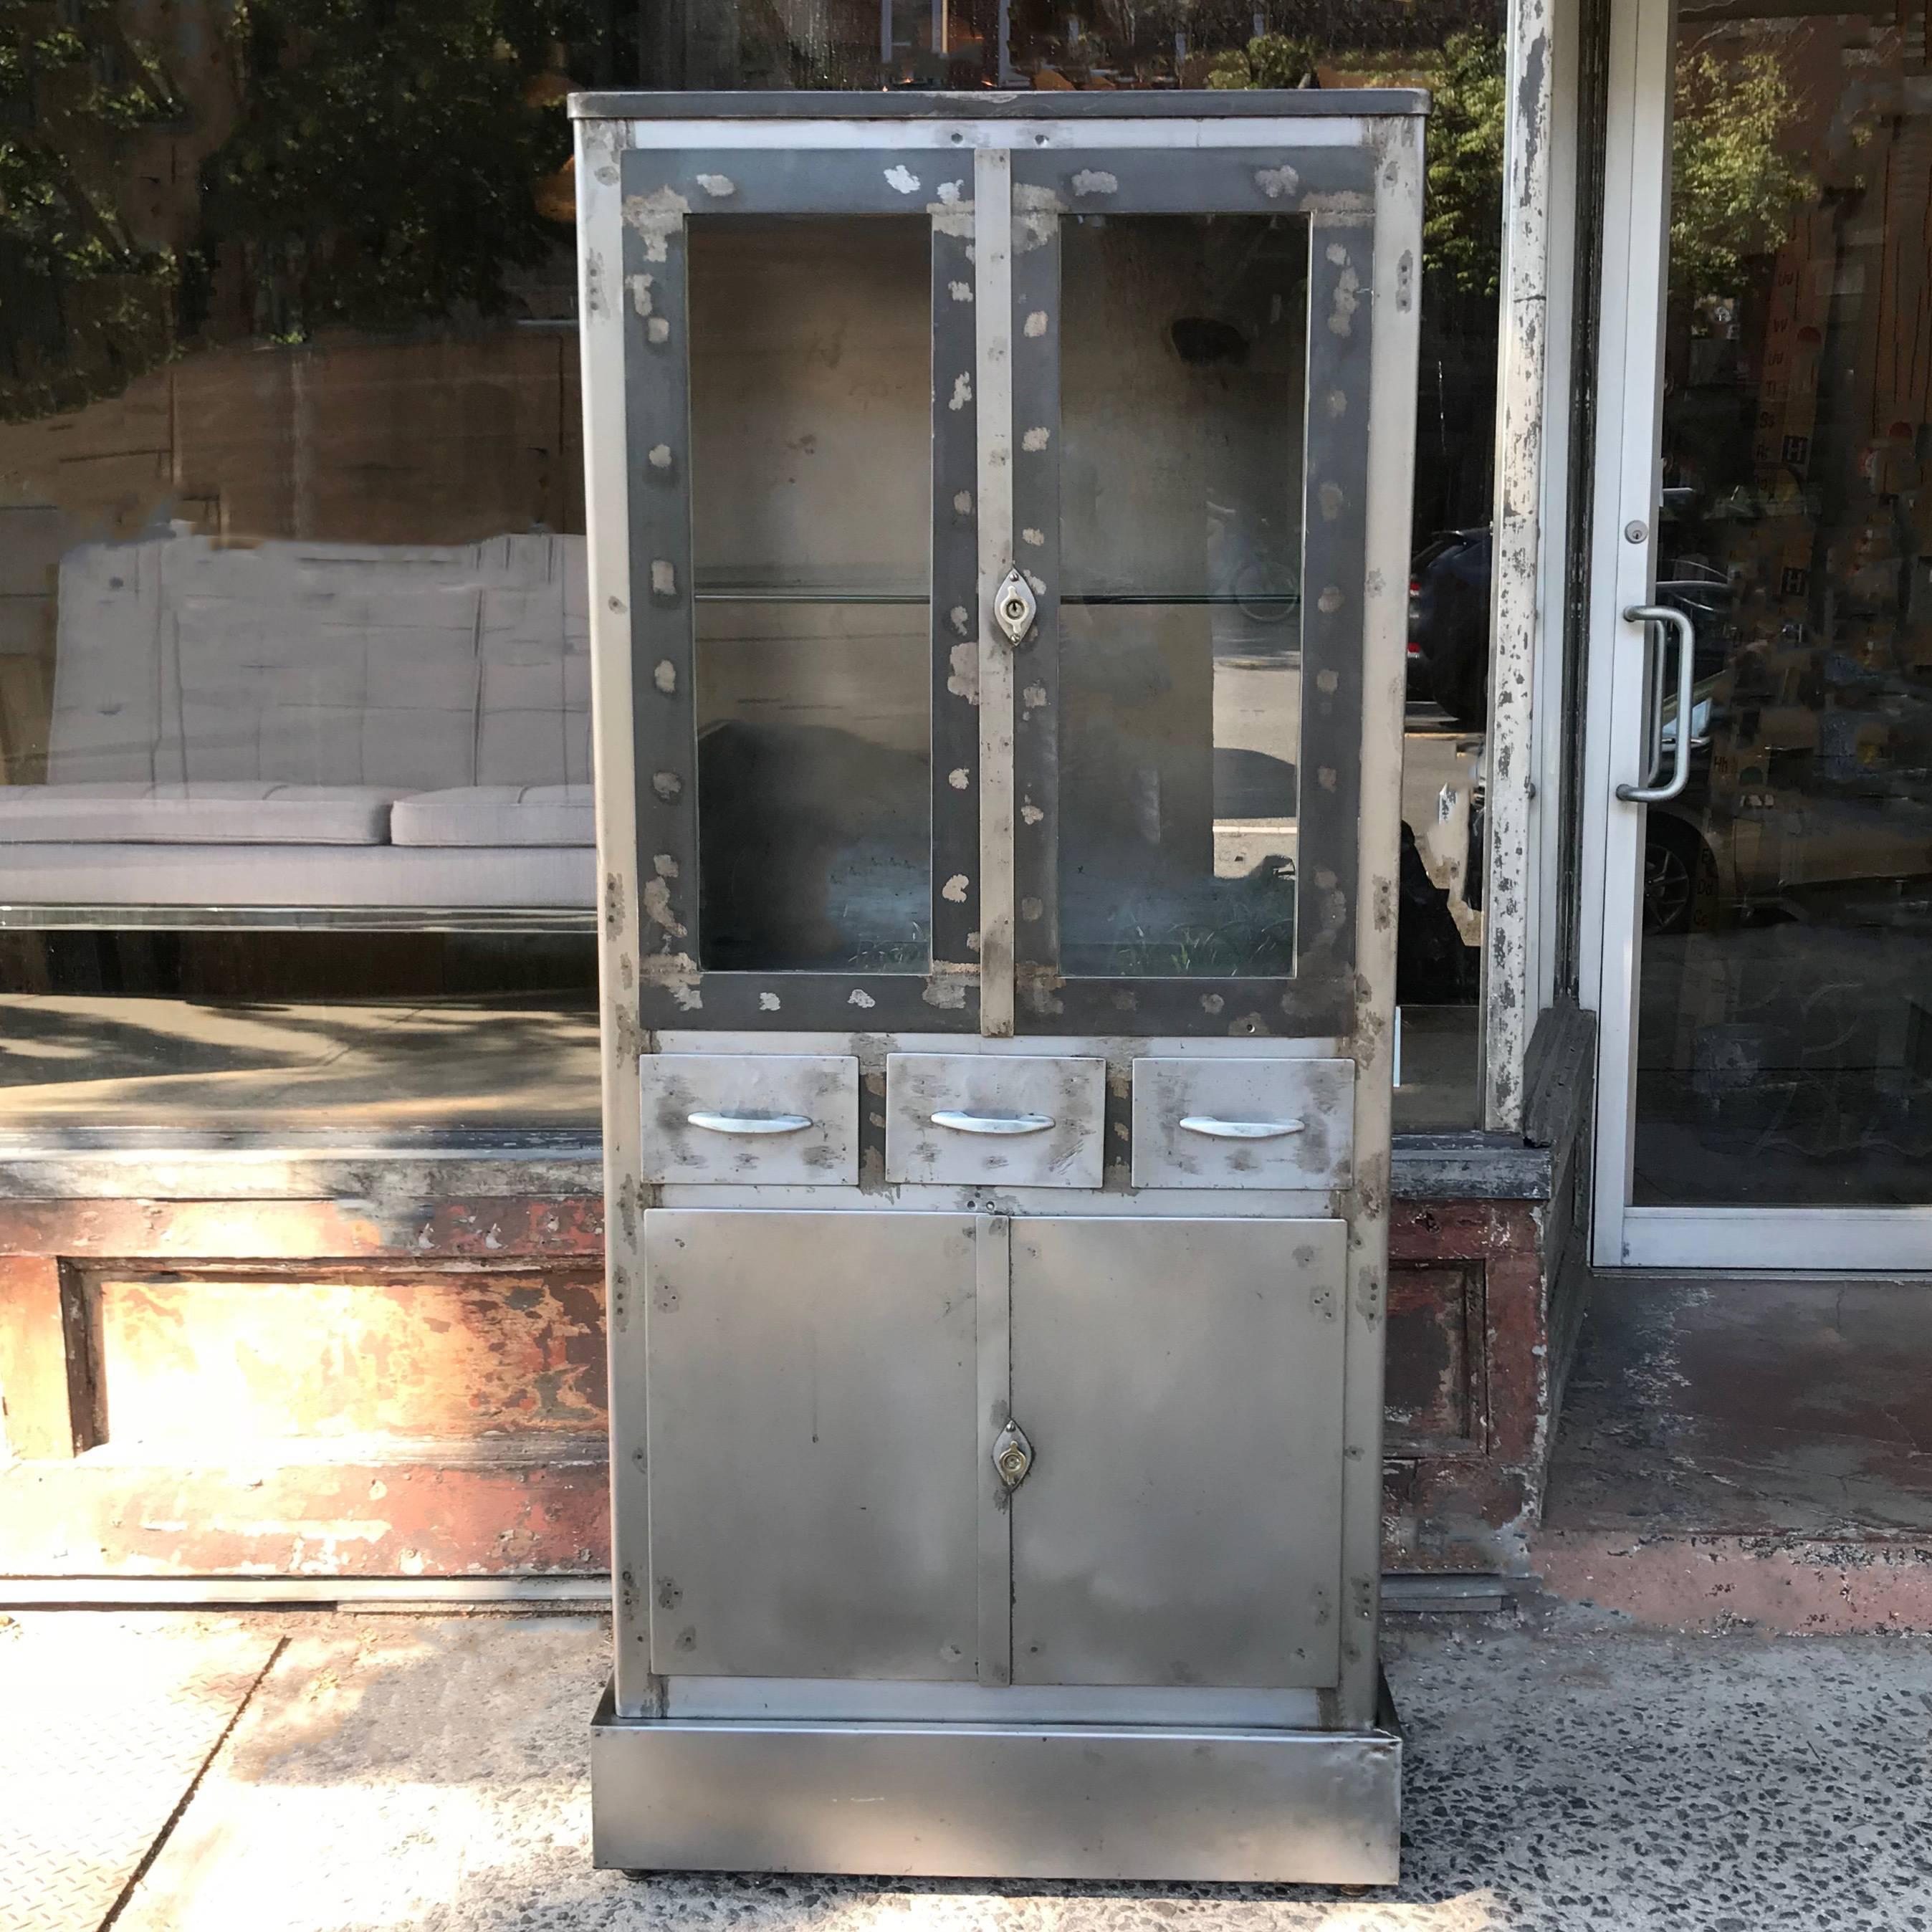 Art Deco, industrial, brushed steel, medical apothecary cabinet or vitrine features glass front display on top and closed storage on the bottom. The cabinet body measures 36 inches wide x 15 inches deep.